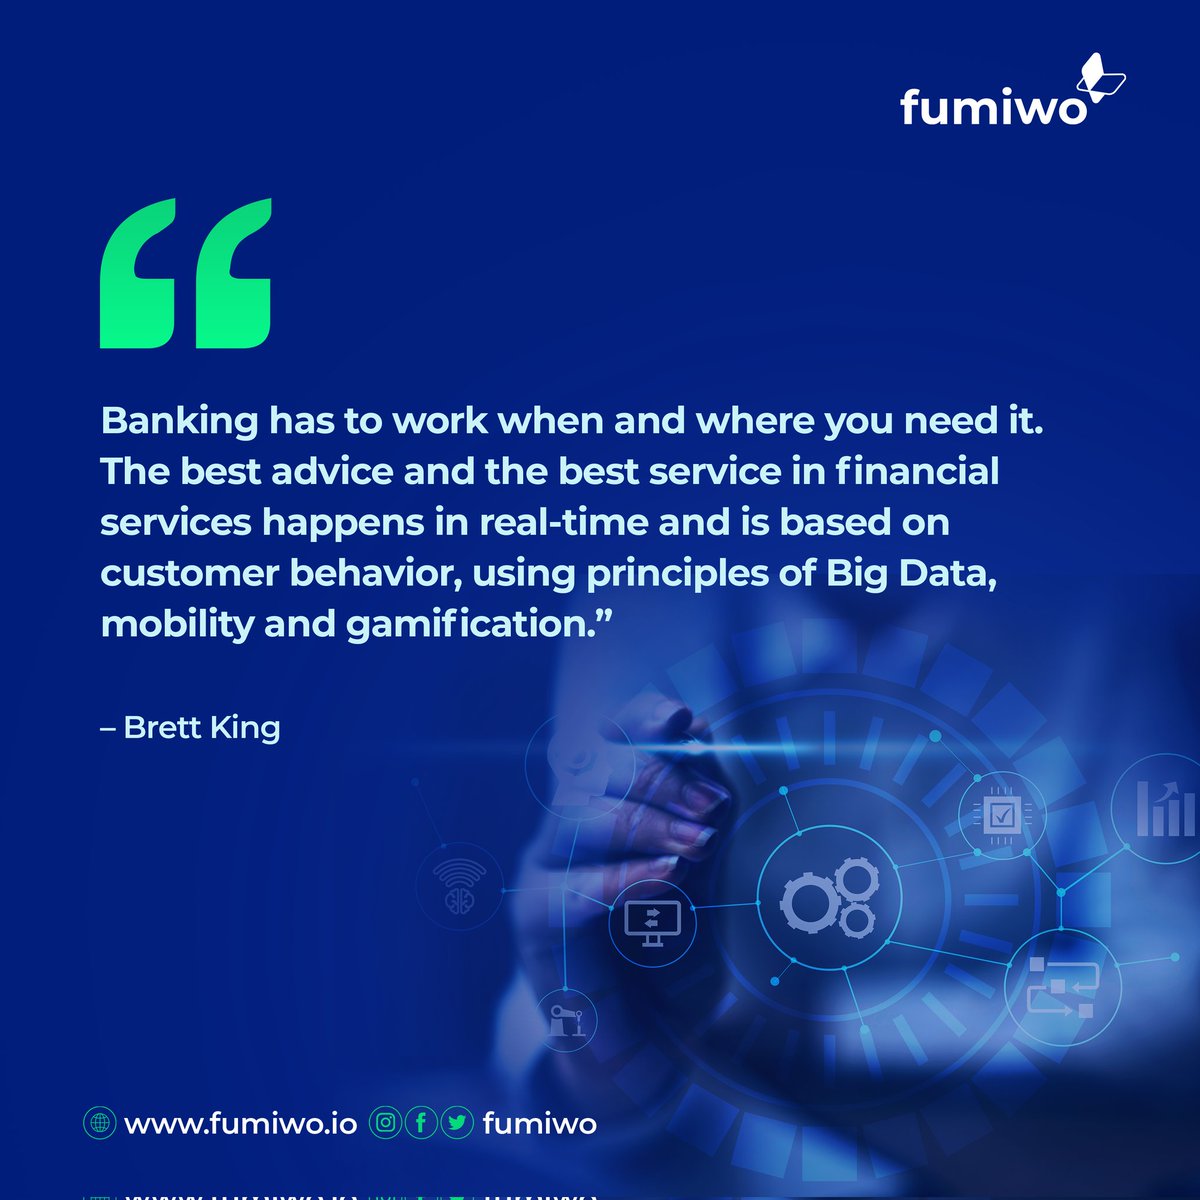 Fumiwo recognizes this truth and actively engage technology to stay relevant and enhance efficiency. 

Click this link to get started 
calendly.com/hello-fumiwo/d…

#CreditScoringSolutions
#FinancialInnovation
#DataDrivenDecisions
#B2BFintech
#CreditRiskManagement
#SmartLending